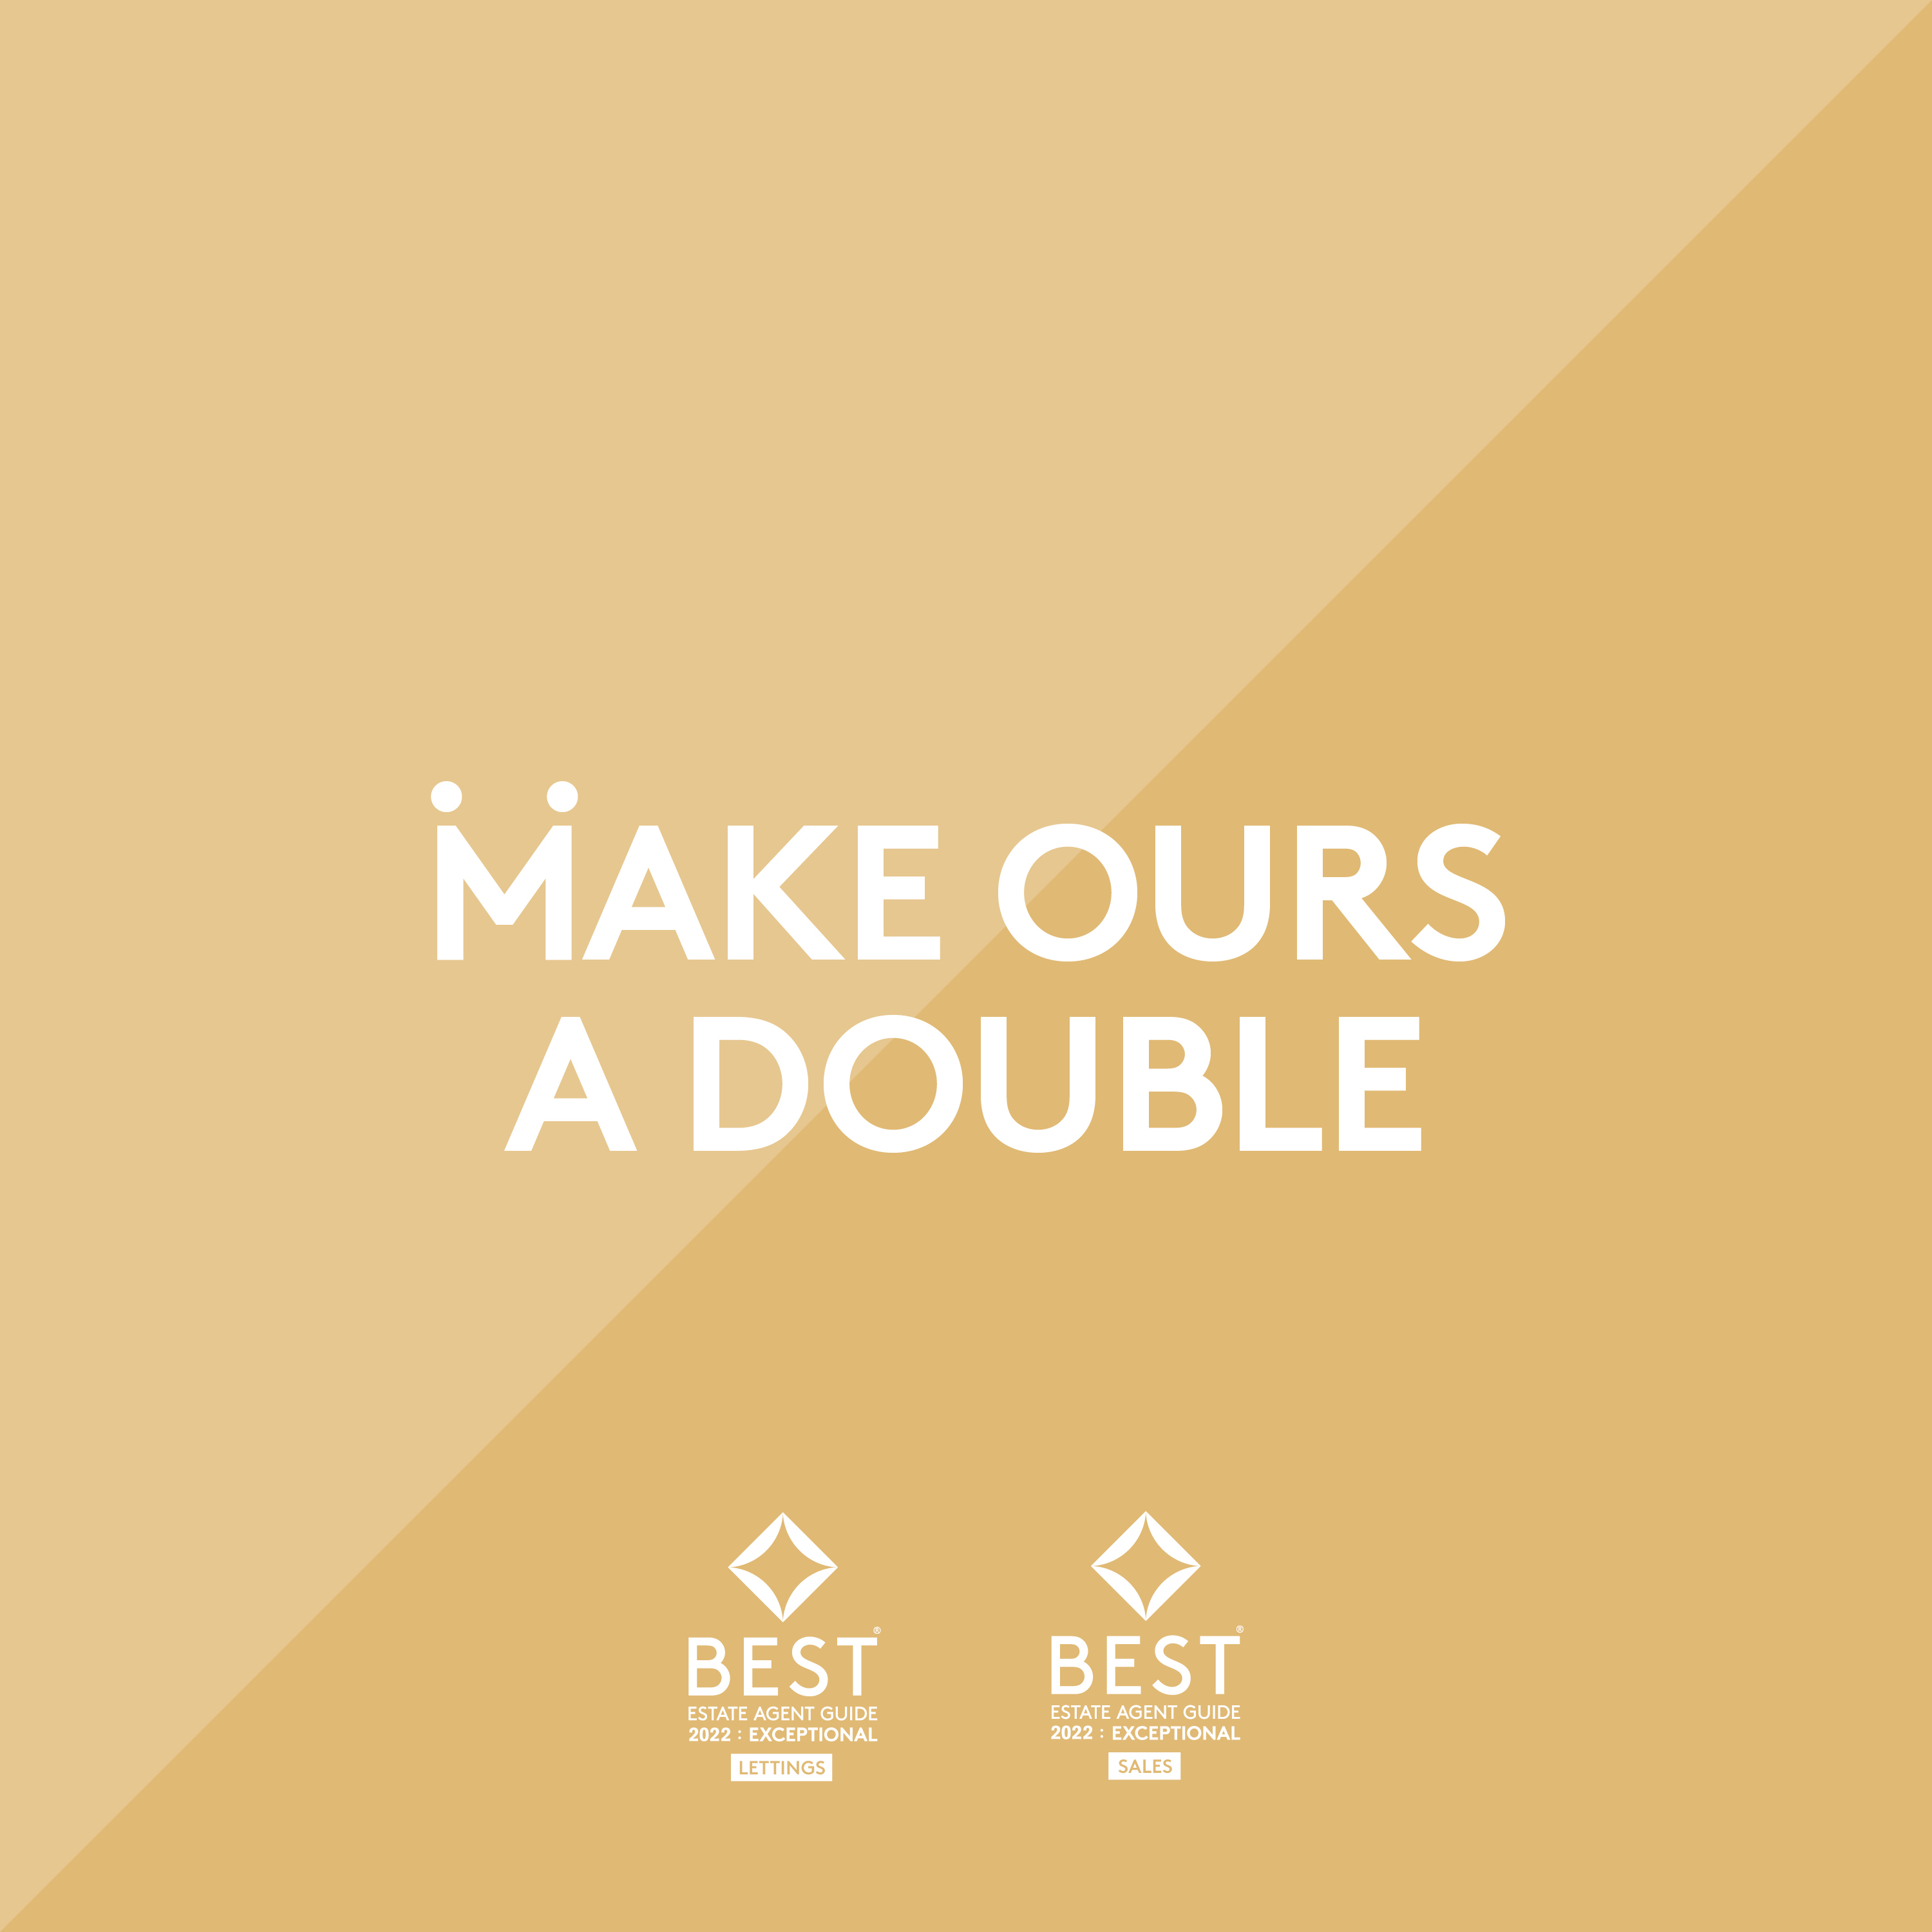 Make ours a double...